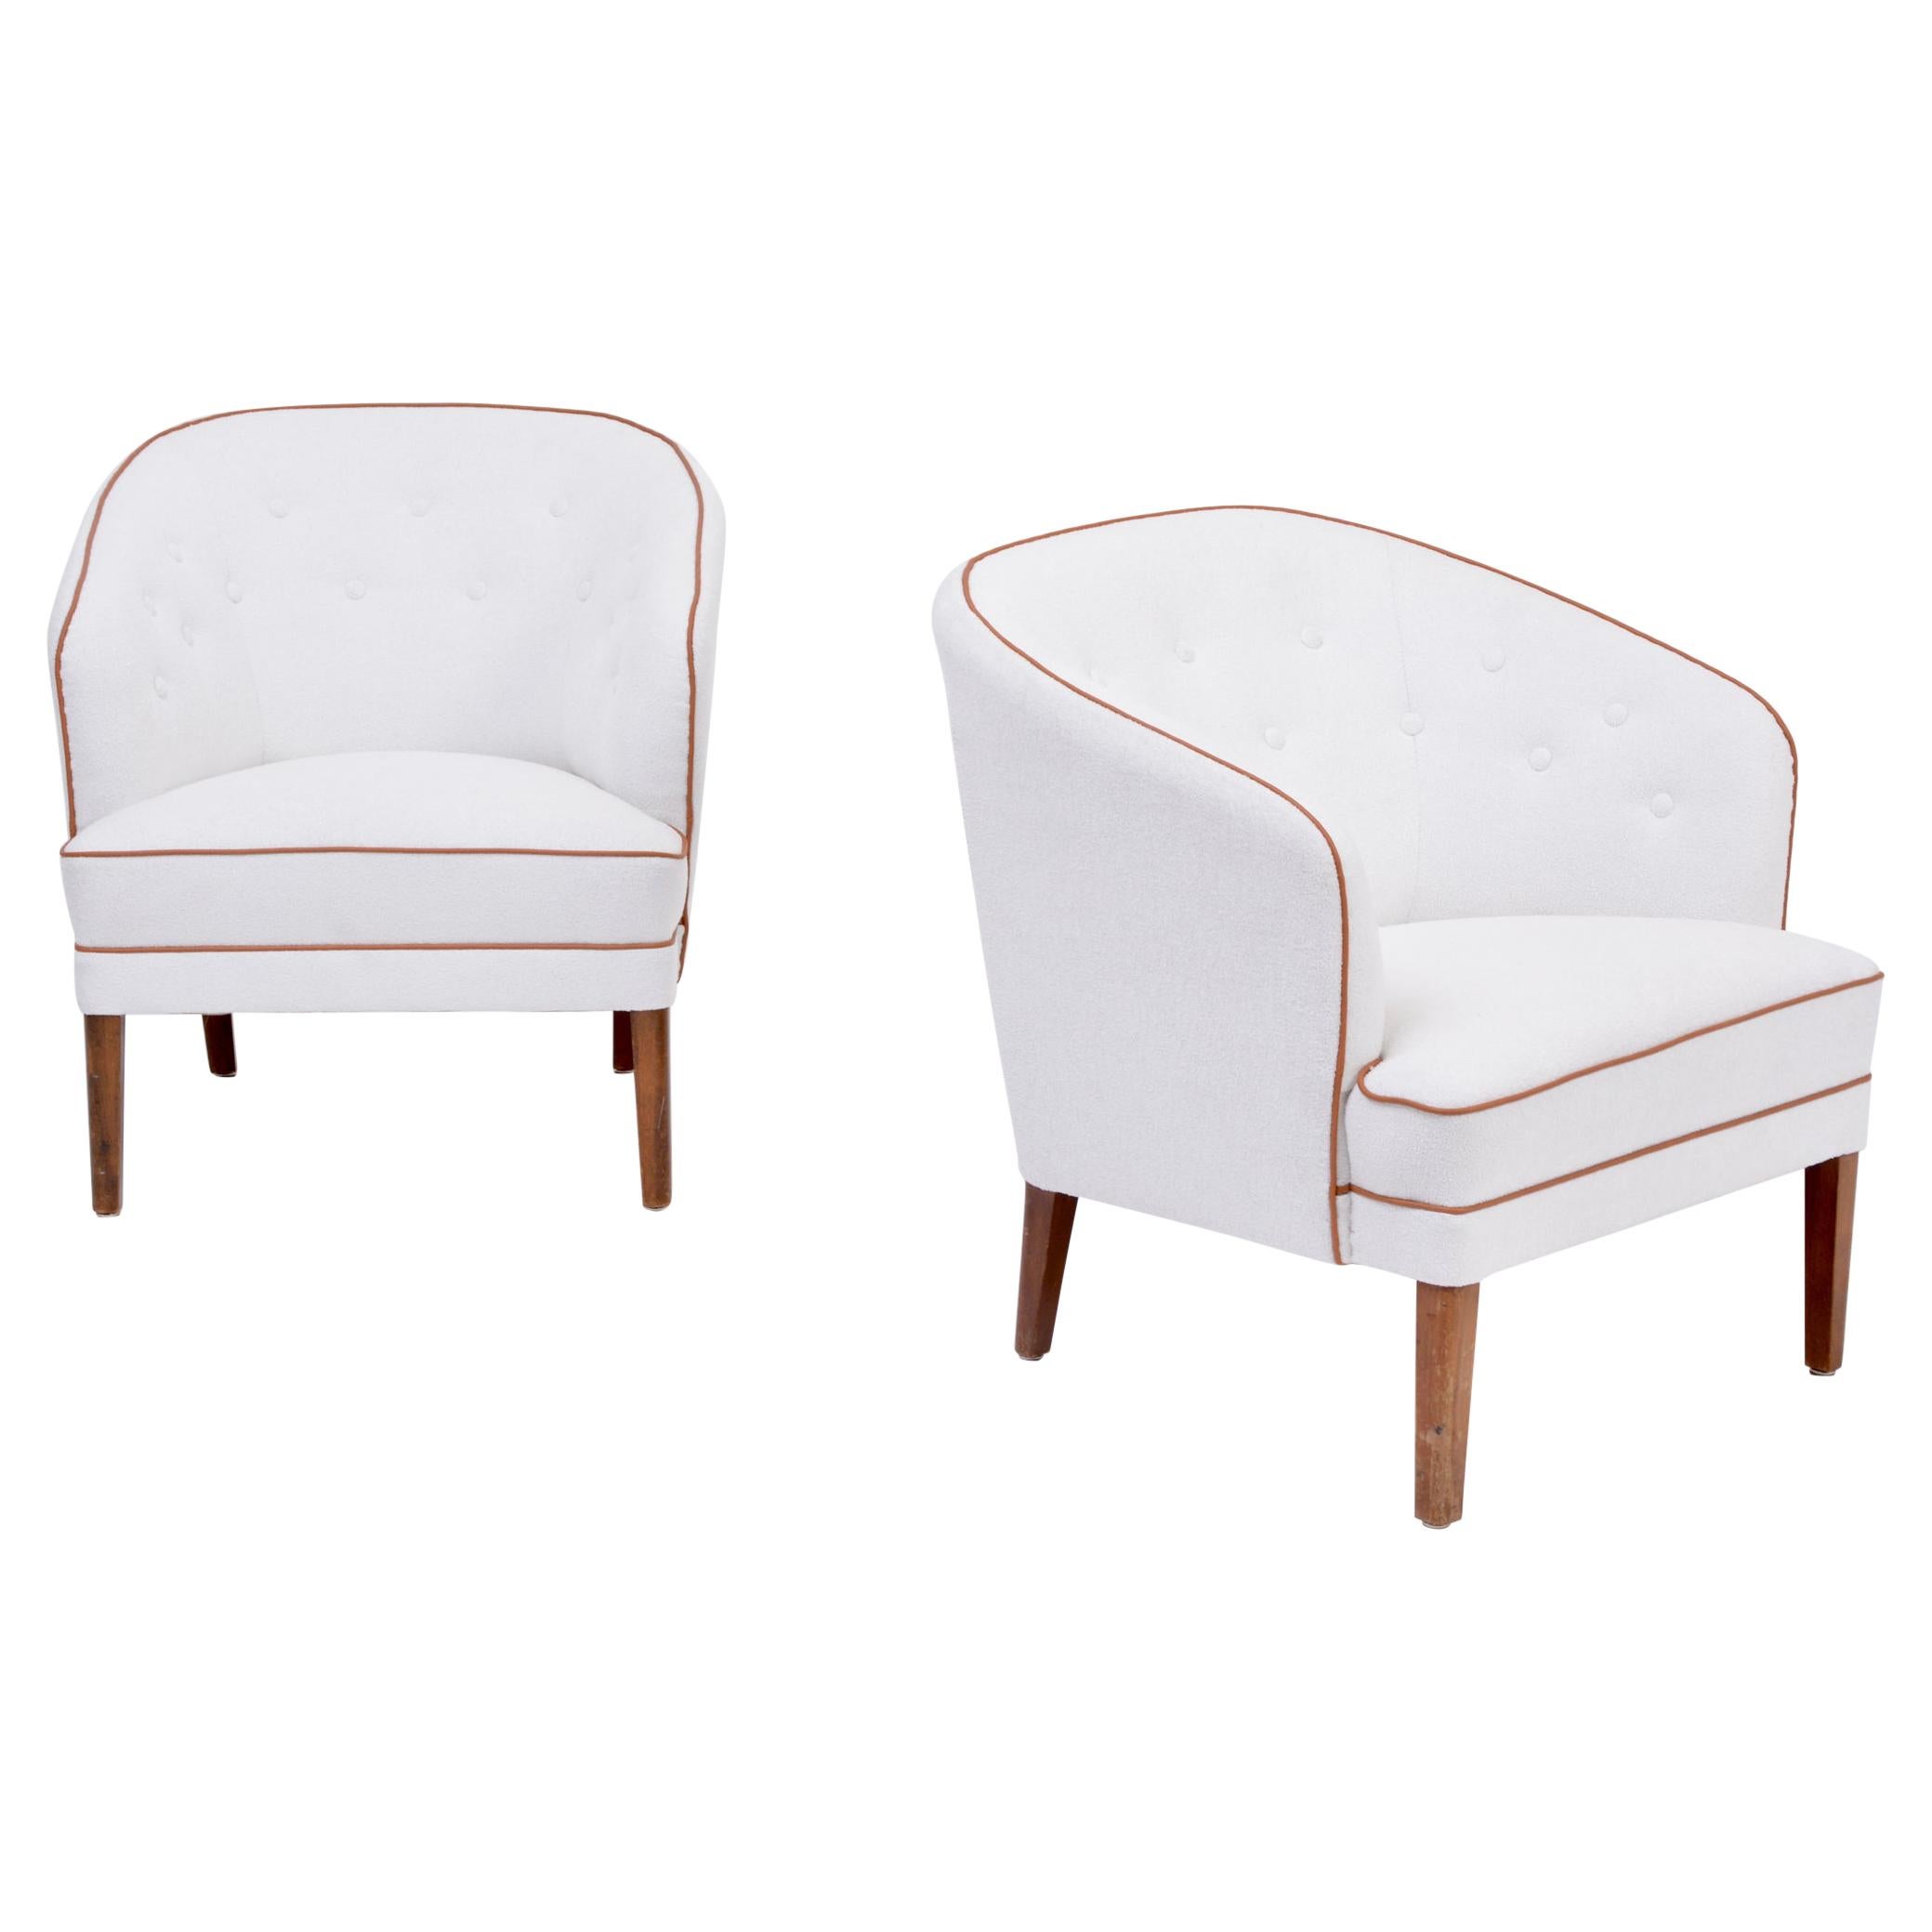 Pair of White Reupholstered Danish Mid-Century Armchairs by Ludvig Pontoppidan